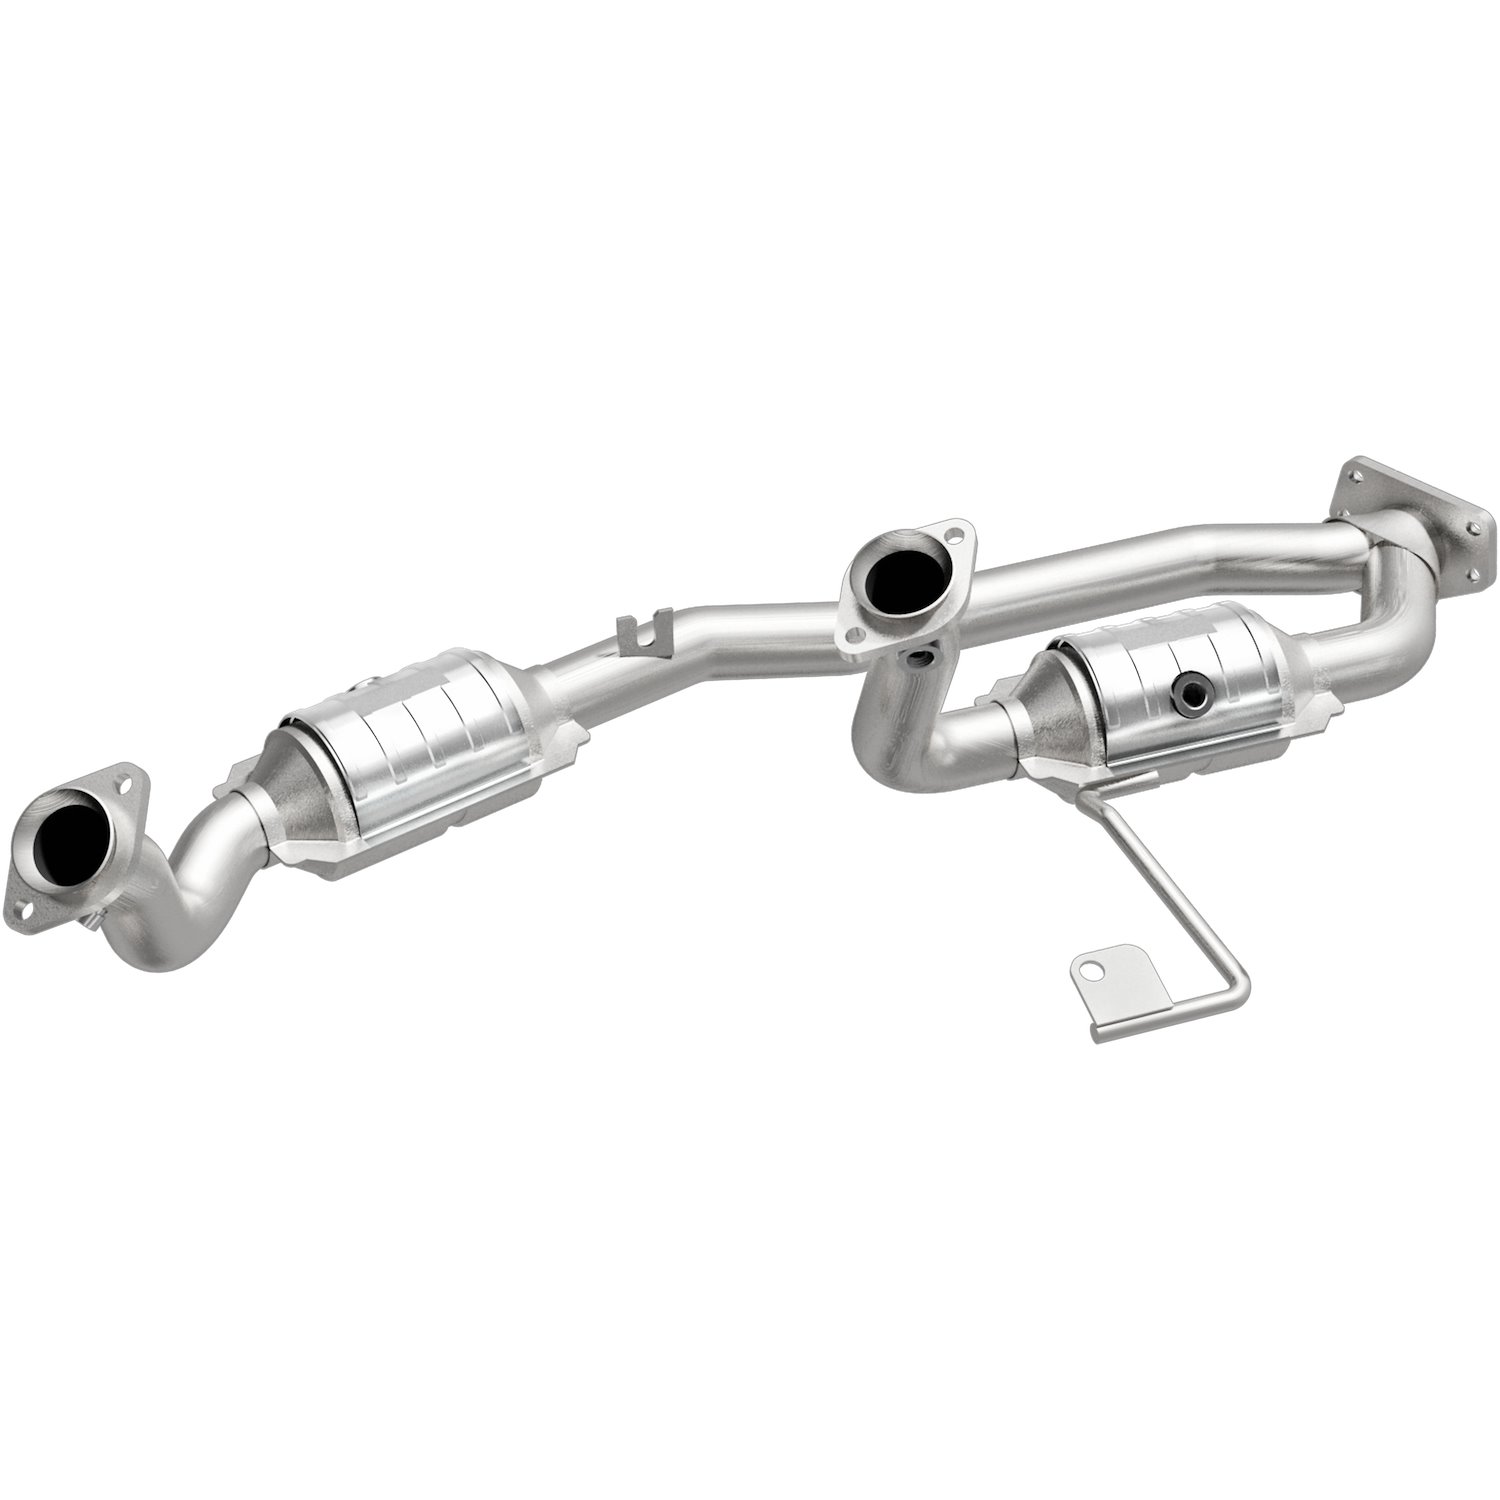 2001-2003 Ford Windstar HM Grade Federal / EPA Compliant Direct-Fit Catalytic Converter